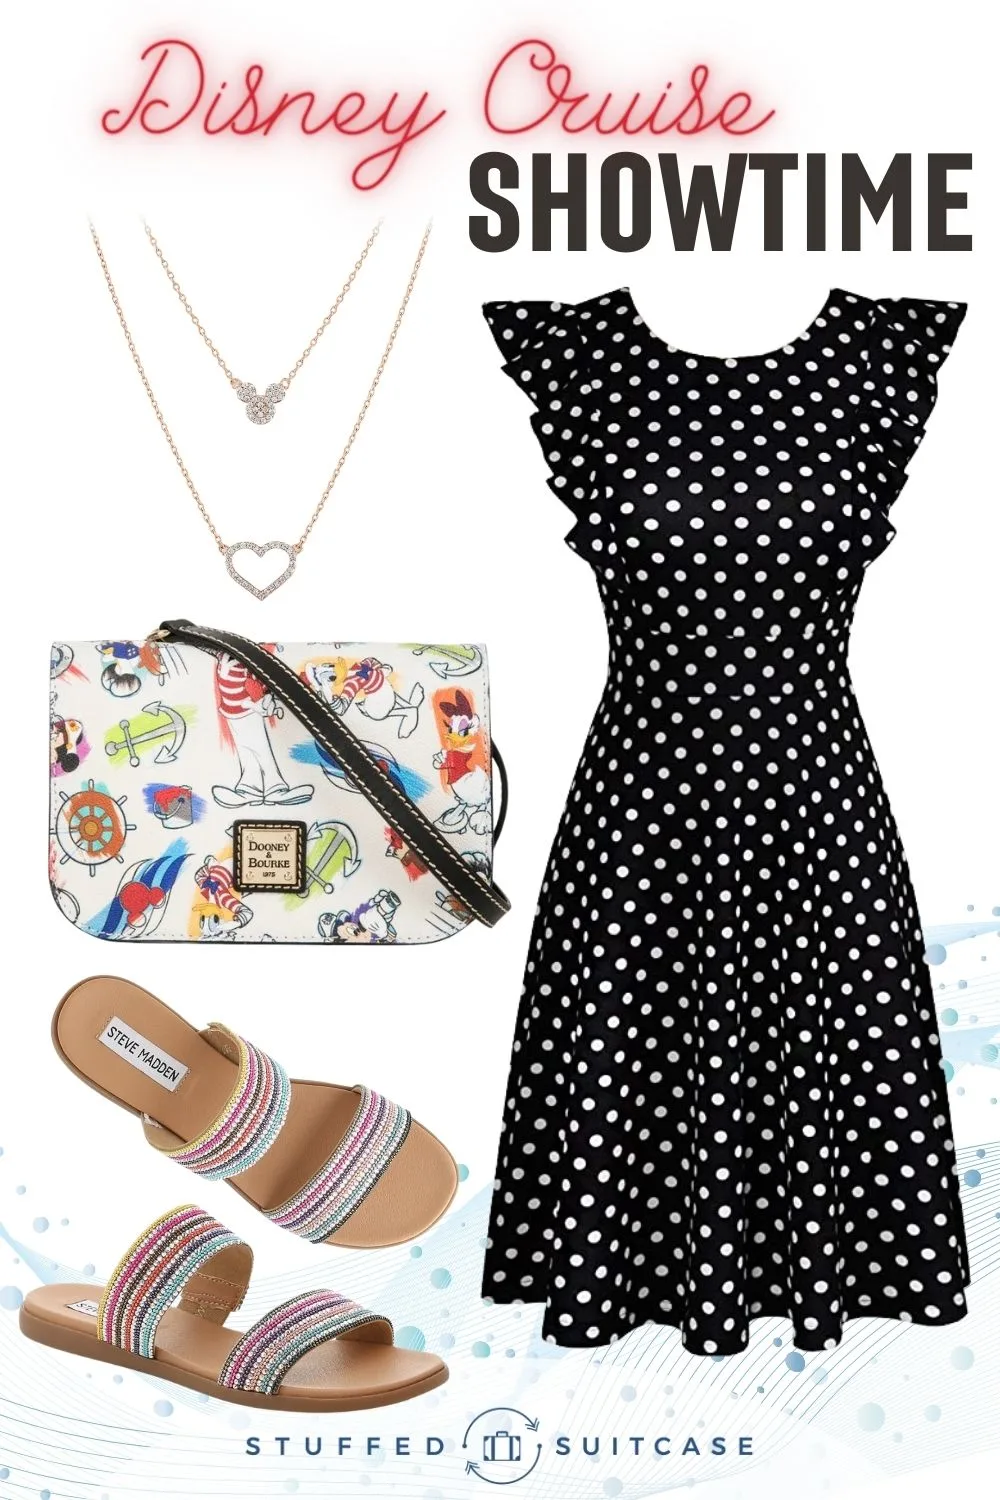 cruise outfit collage with dress purse sandals necklace